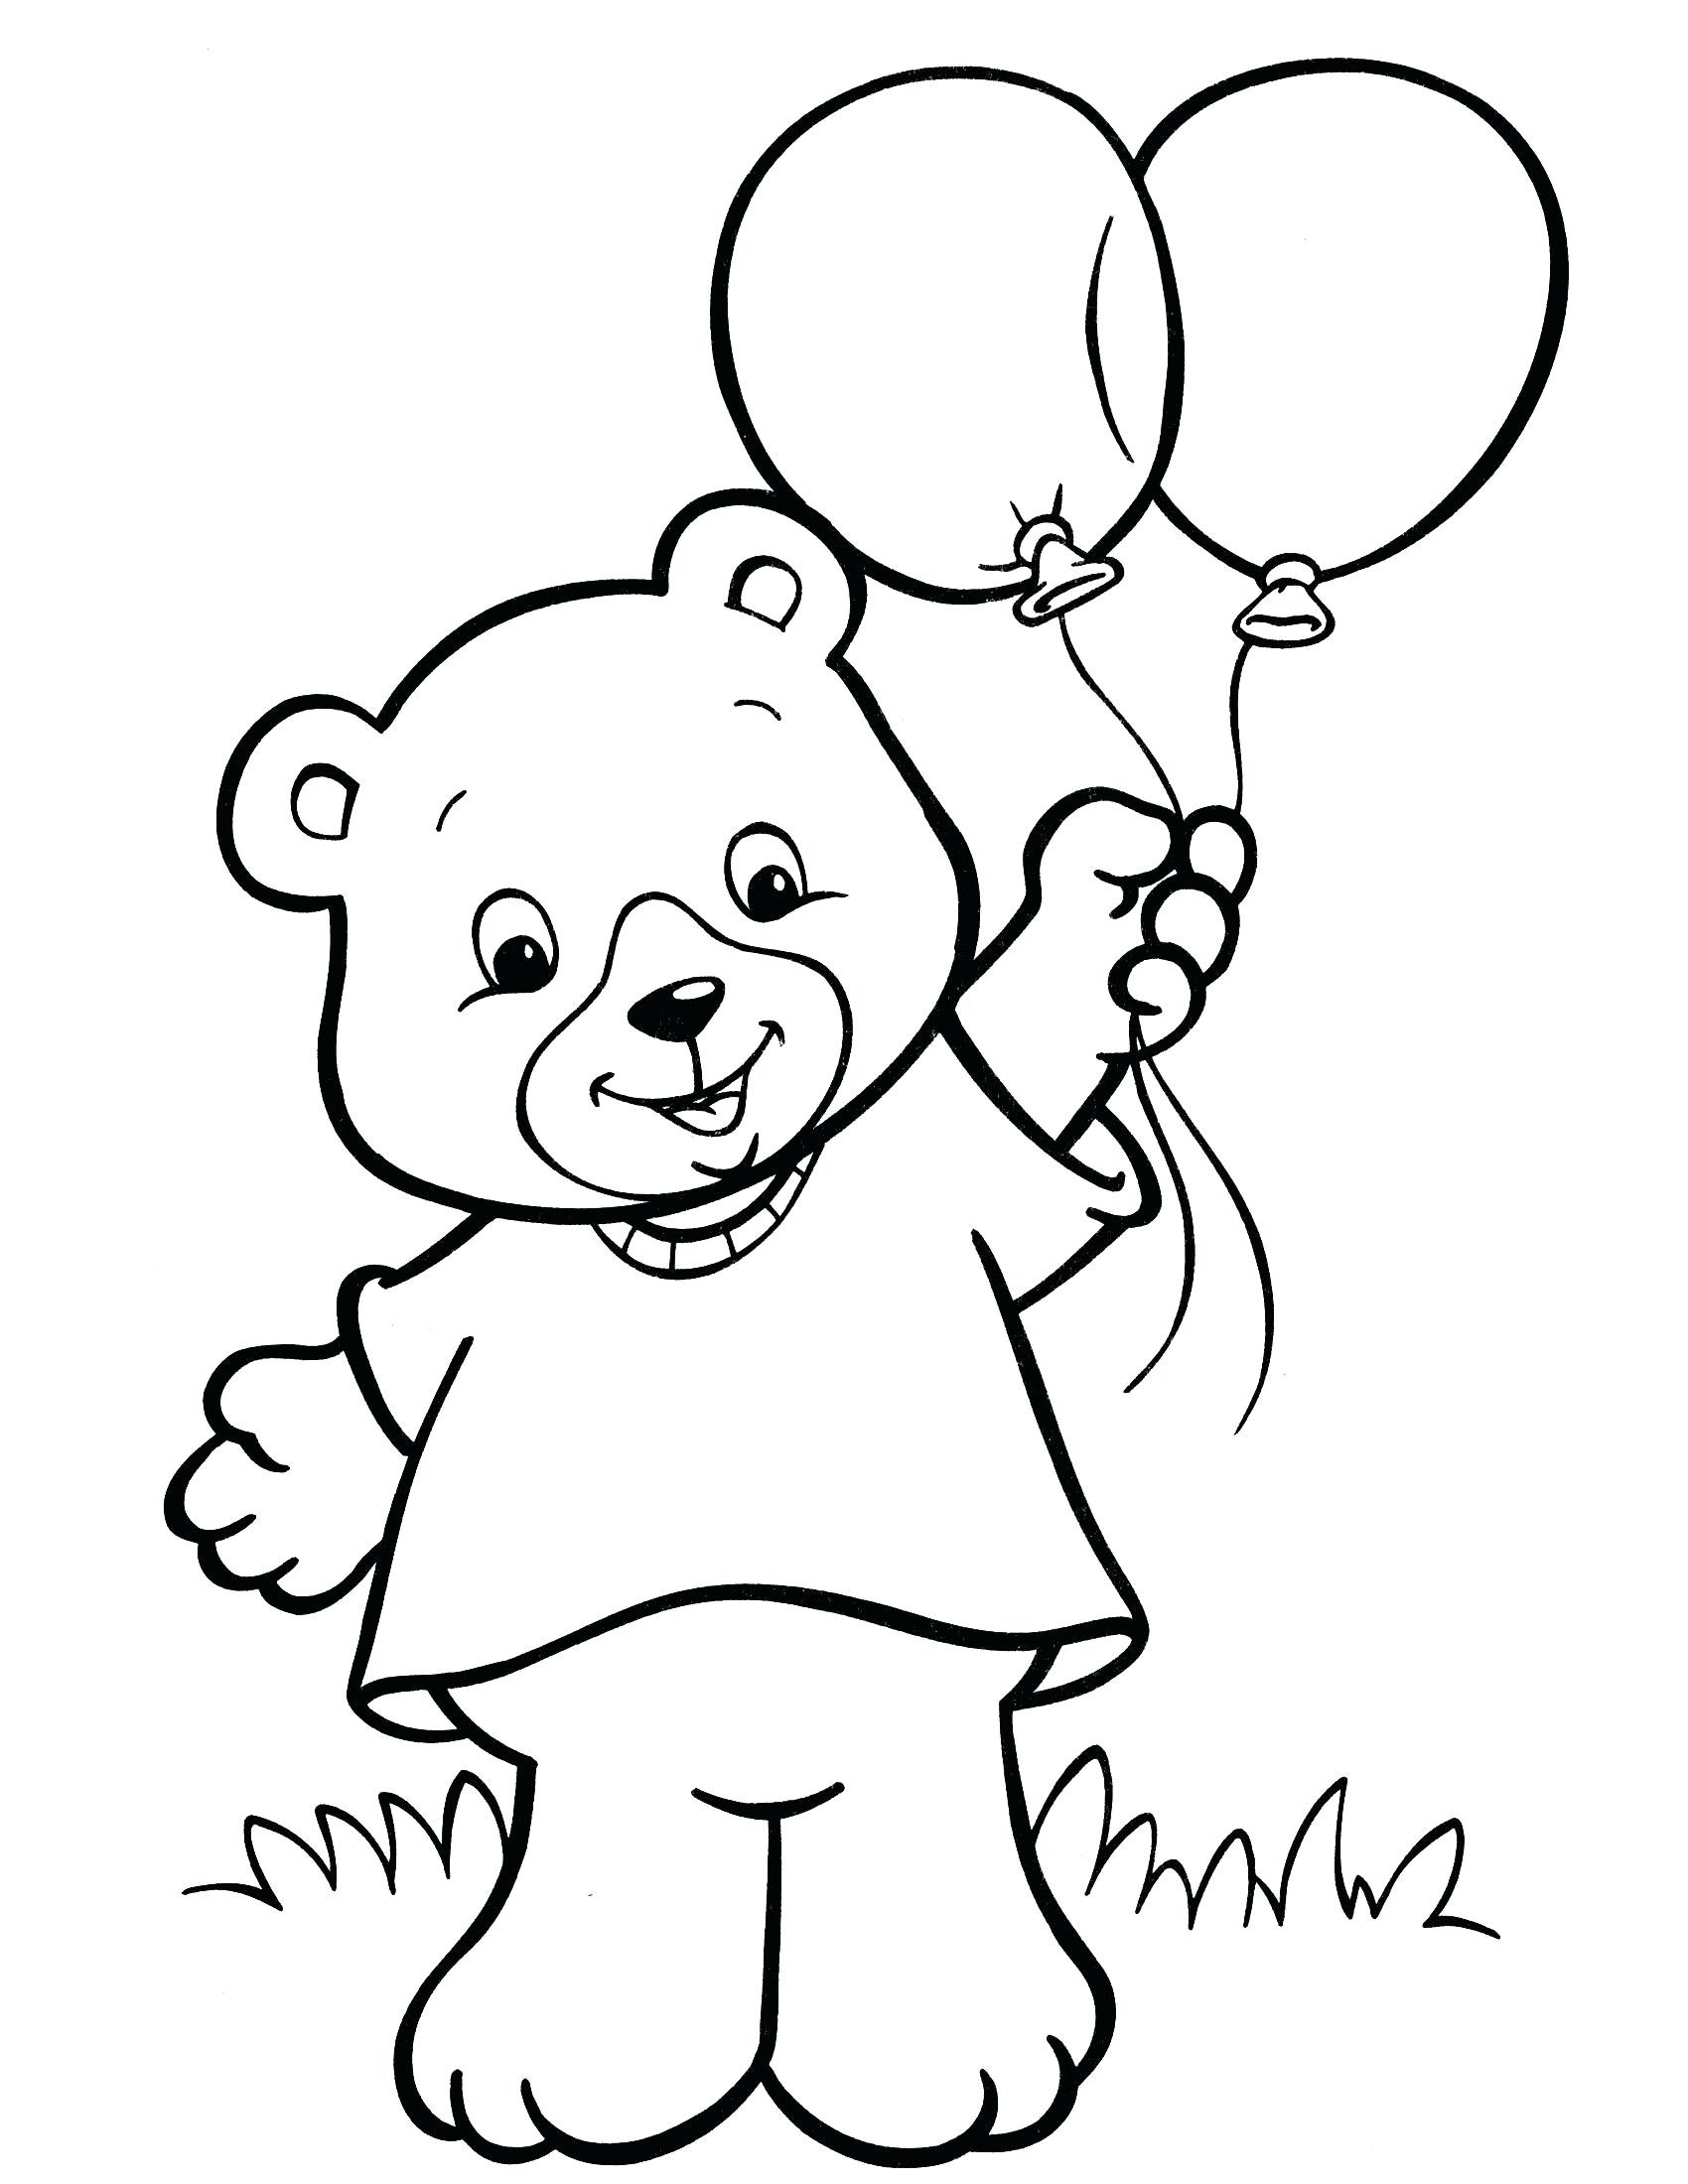 Excellent Free Printable Coloring Pages For 2 Year Olds #651 - Free Printable Coloring Pages For 2 Year Olds